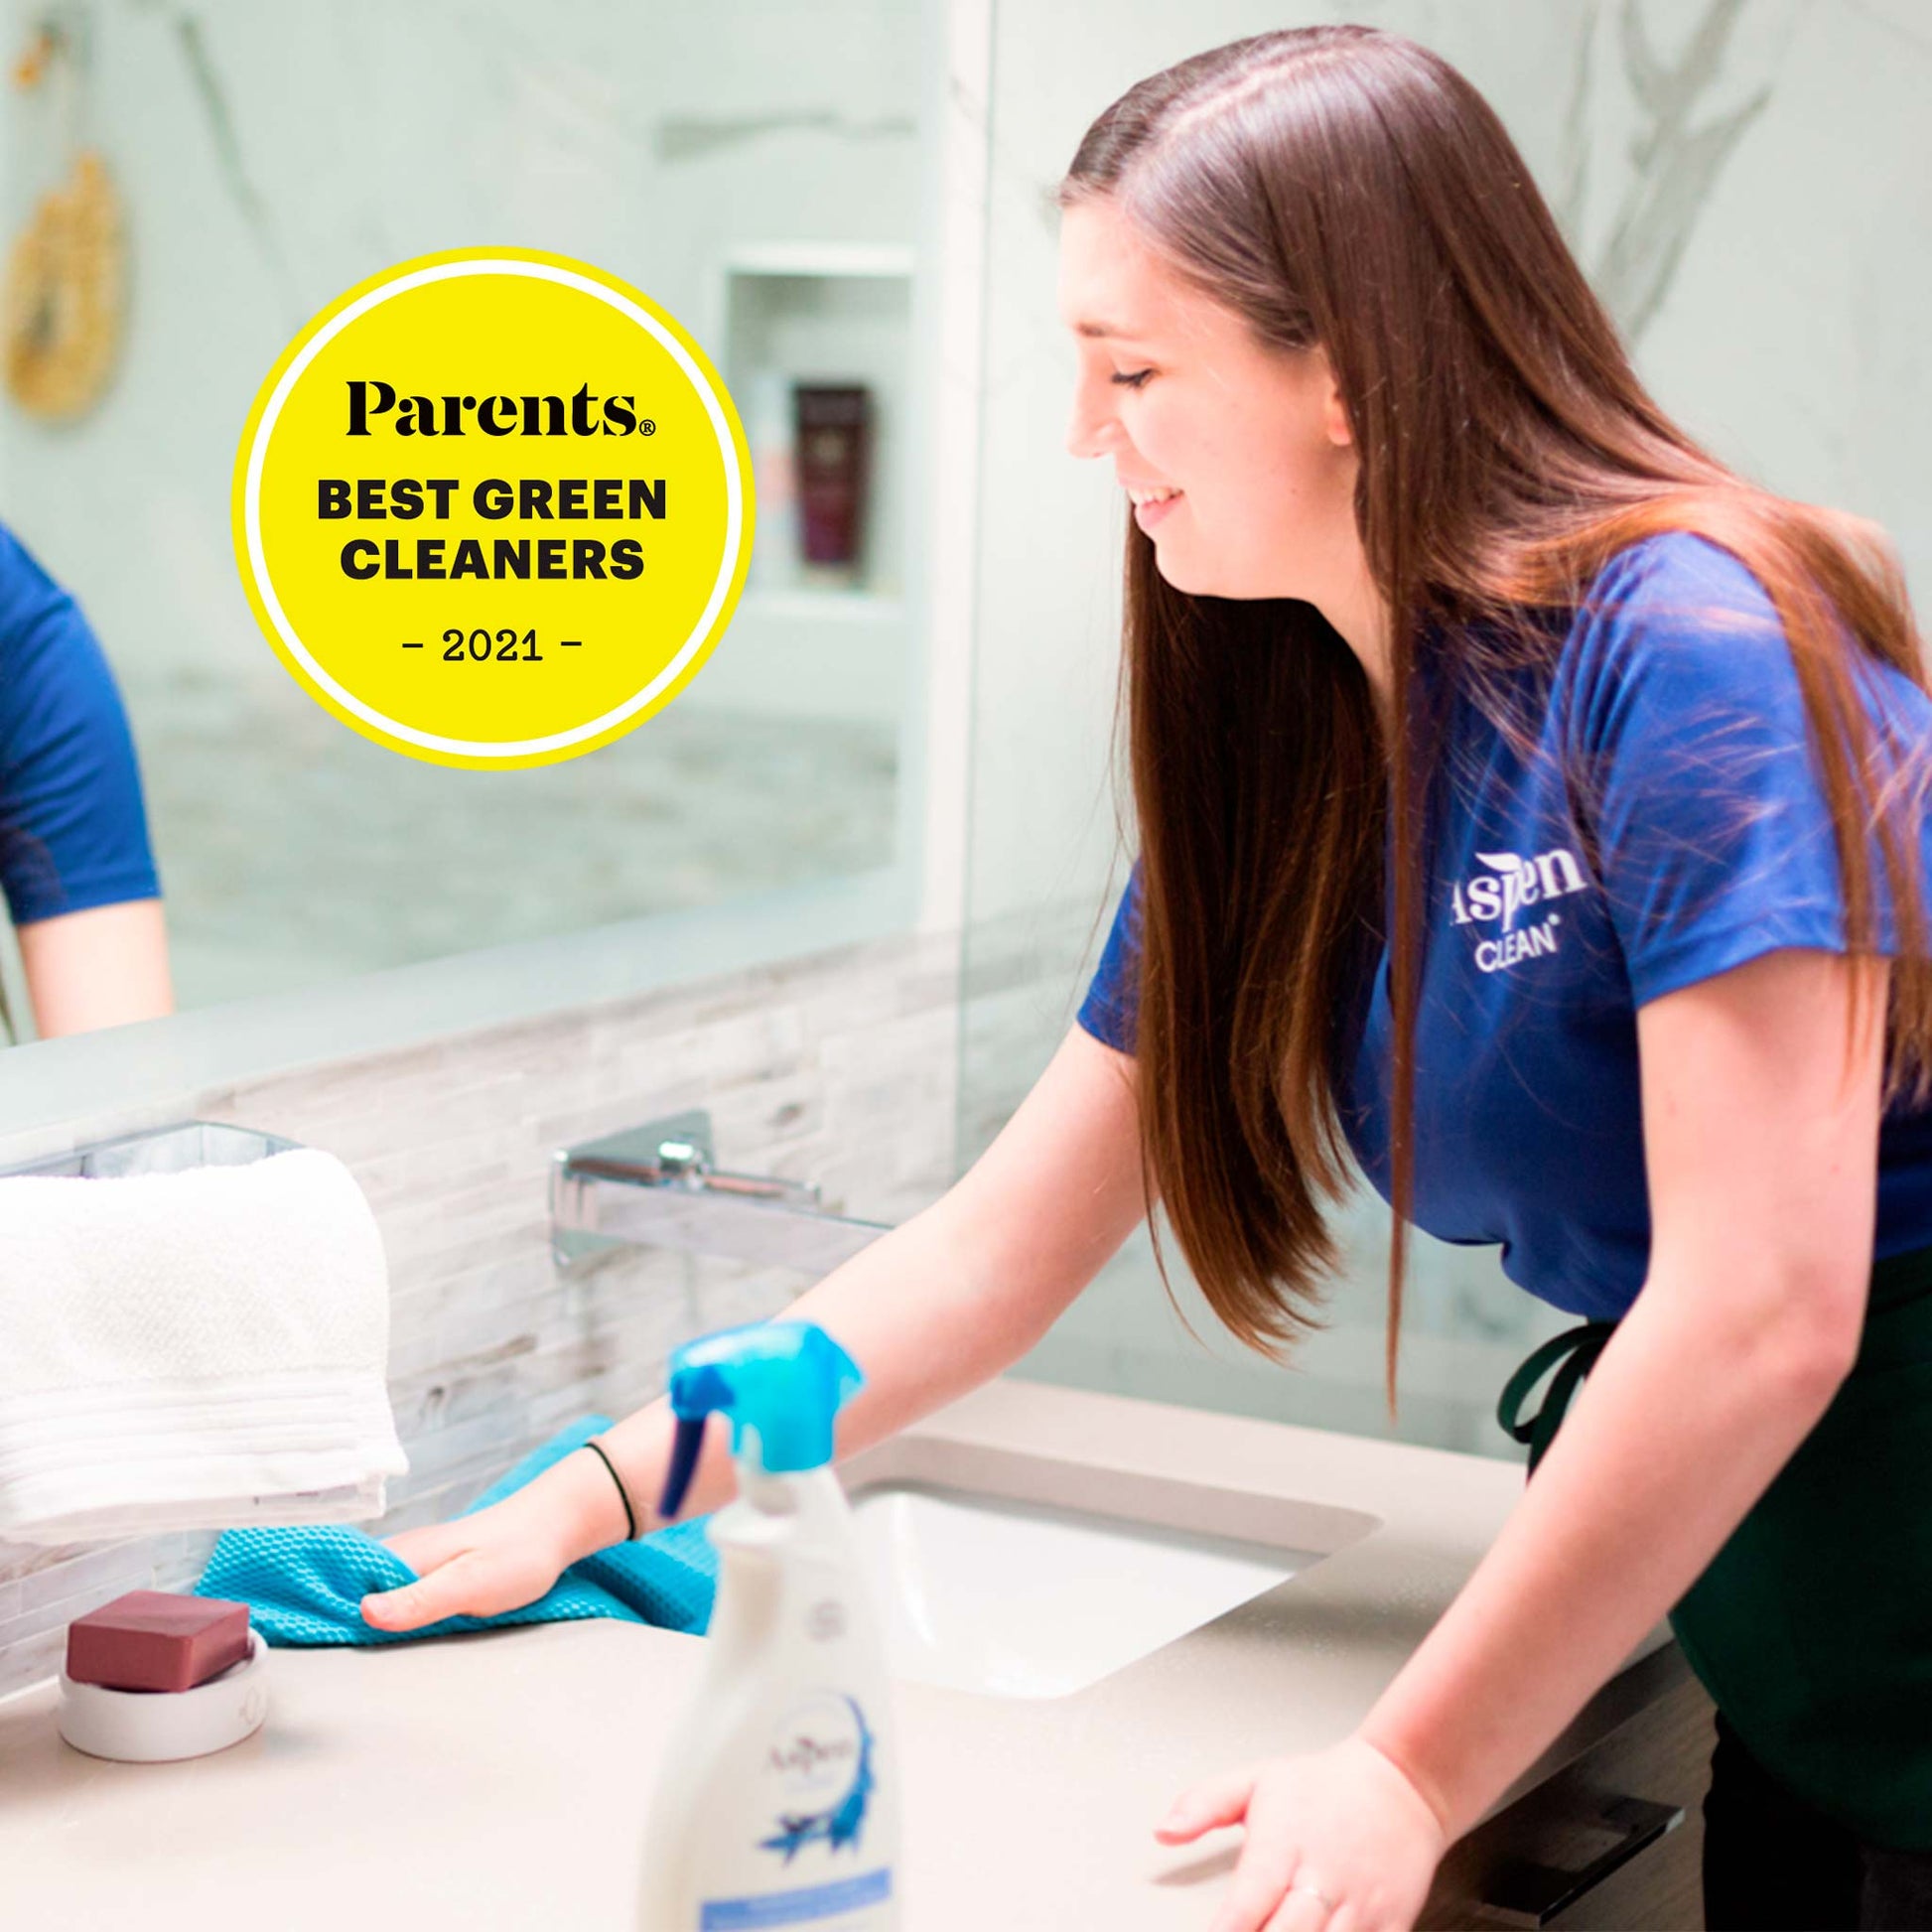 AspenClean Bathroom Cleaner has been Voted best green cleaner by Parents Magazine, two years in a row